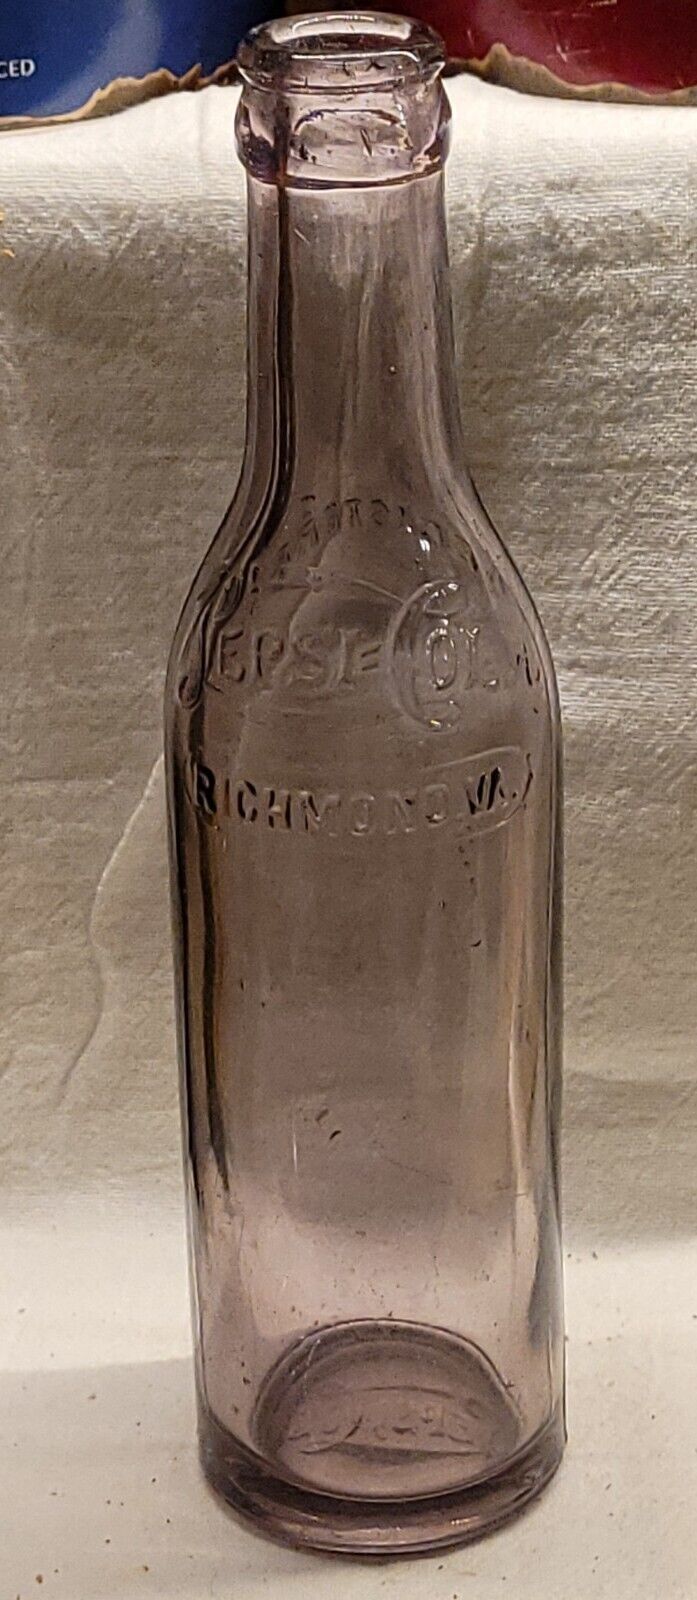 OLD STRAIGHT SIDE PEPSI COLA BOTTLE RICHMOND VIRGINIA AWESOME AMETHYST COLOR